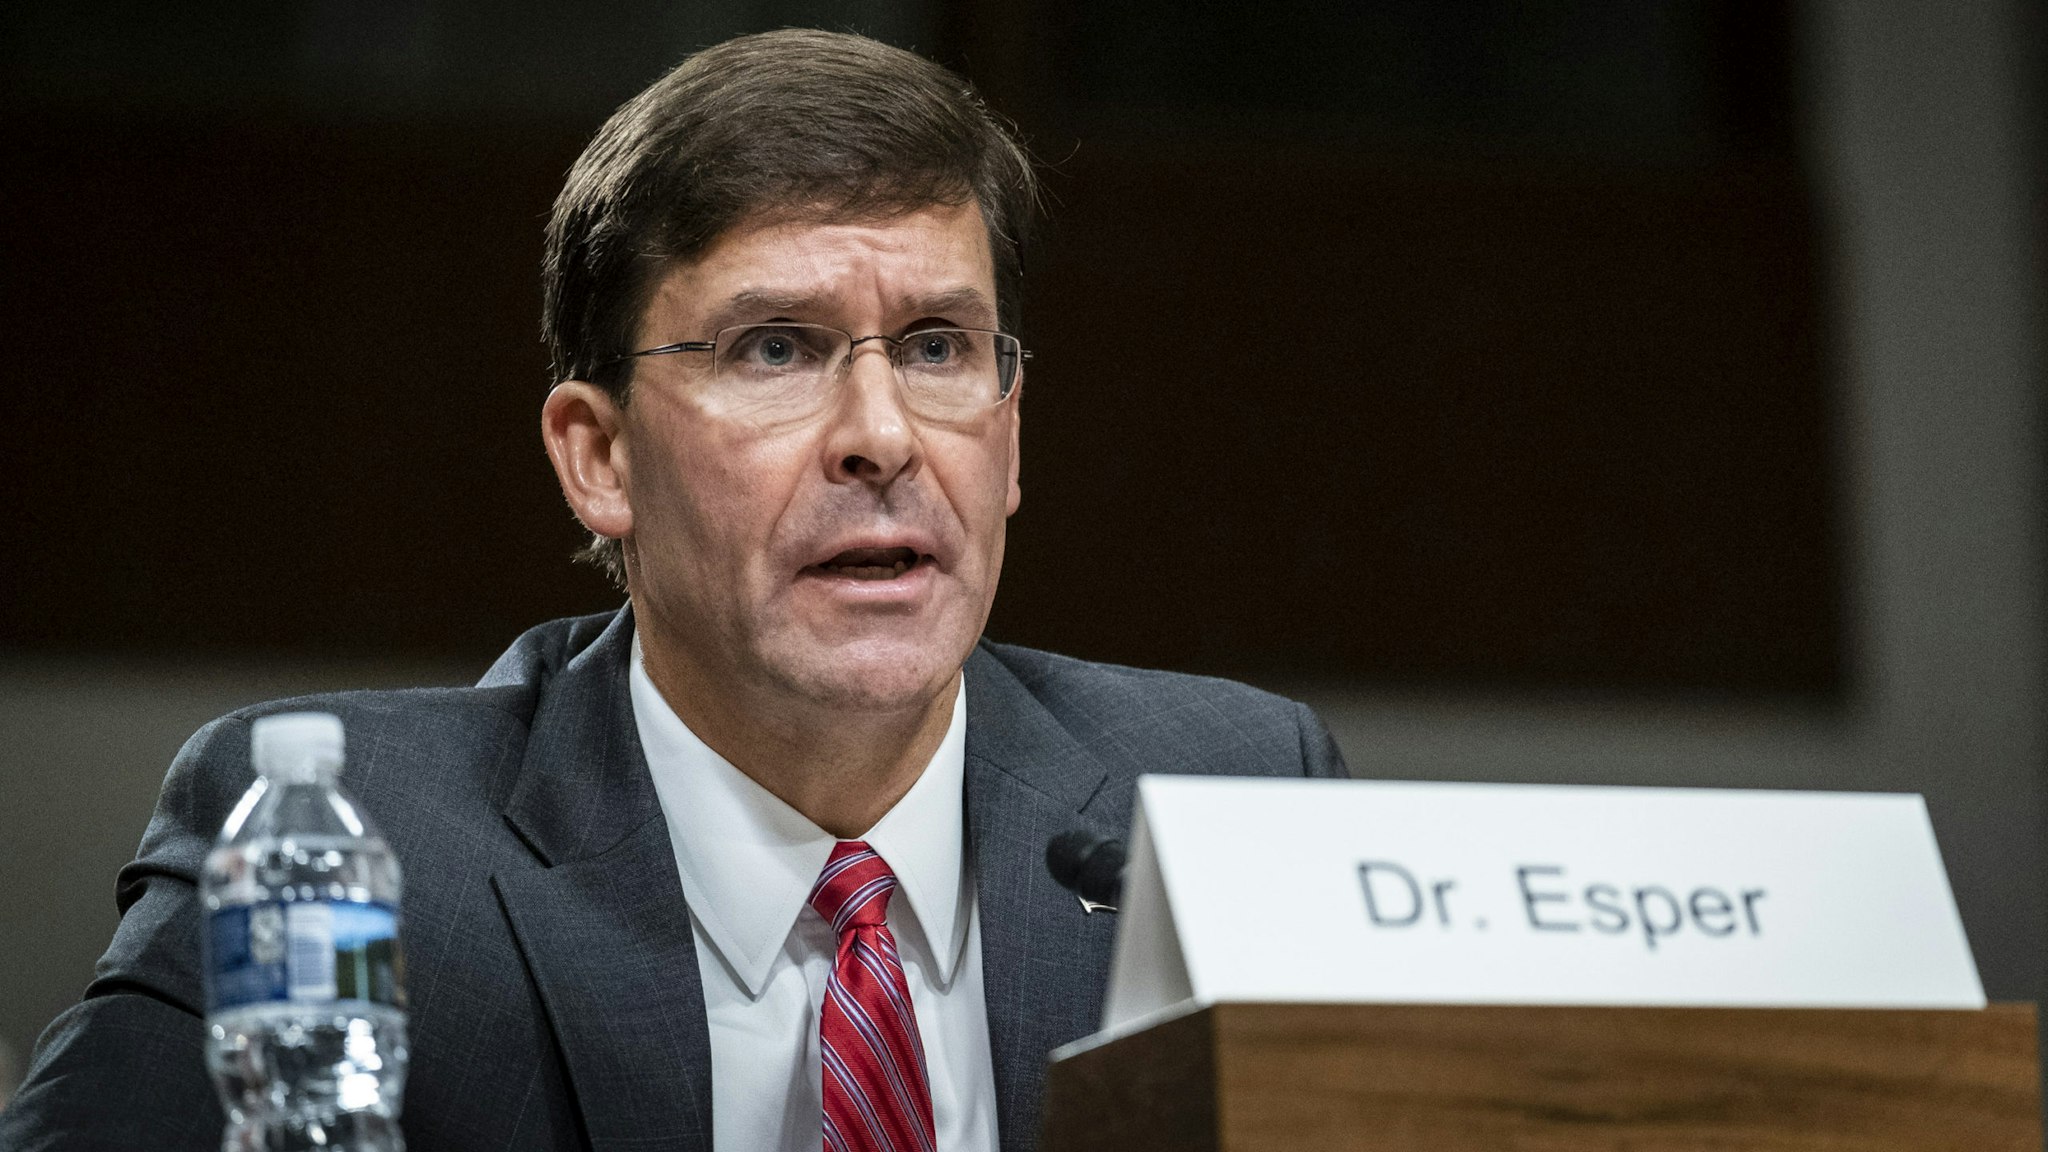 WASHINGTON, DC - JULY 16: Secretary of Defense nominee, Mark Esper, testifies before the Senate Armed Services Committee during his confirmation hearing on July 16, 2019 in Washington, DC. Esper has been Acting Secretary of Defense since Patrick Shanahan stepped down due to revelations about his past.